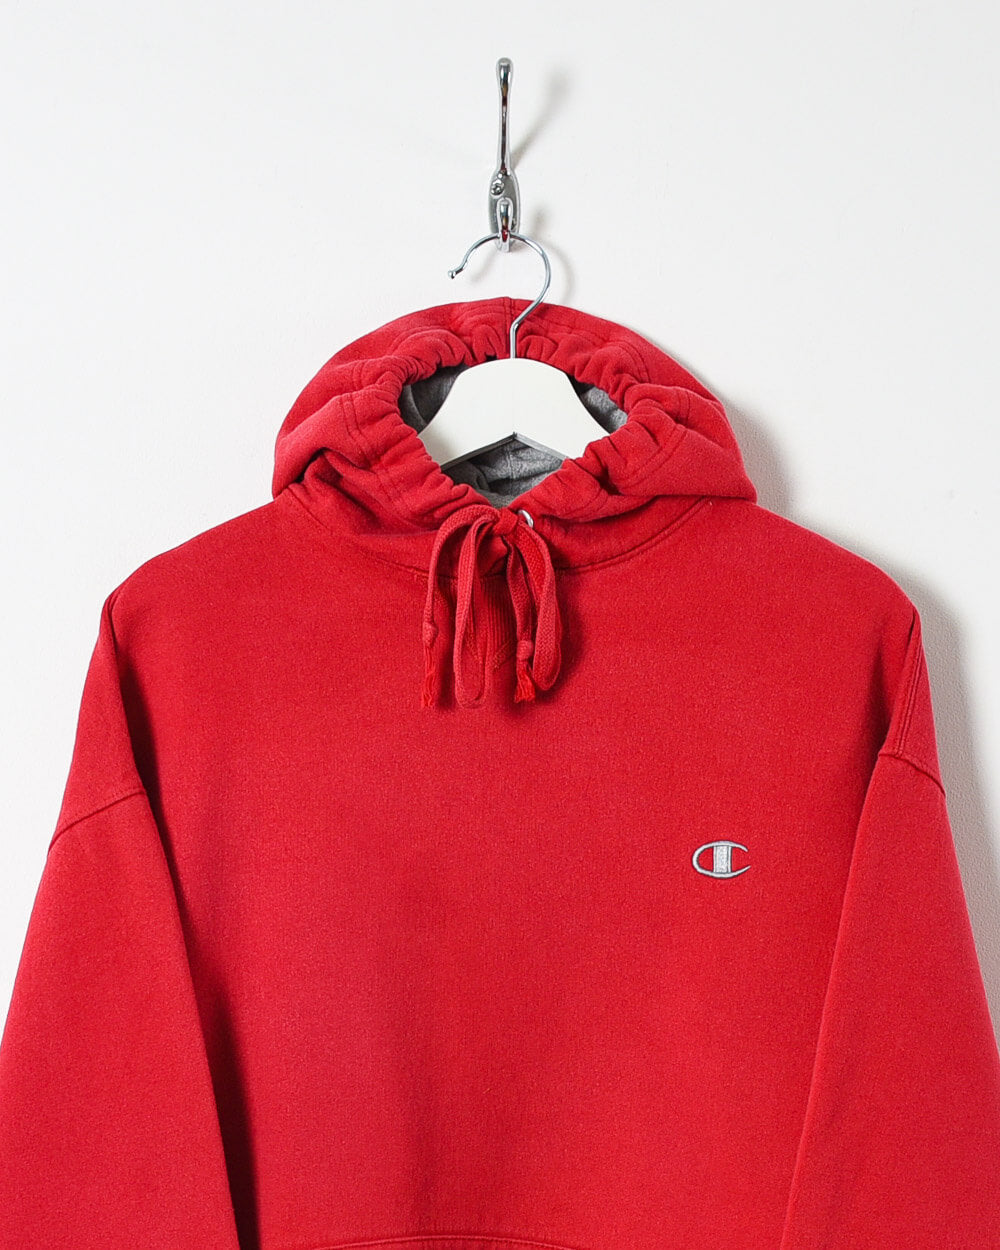 Red Champion Hoodie - Large